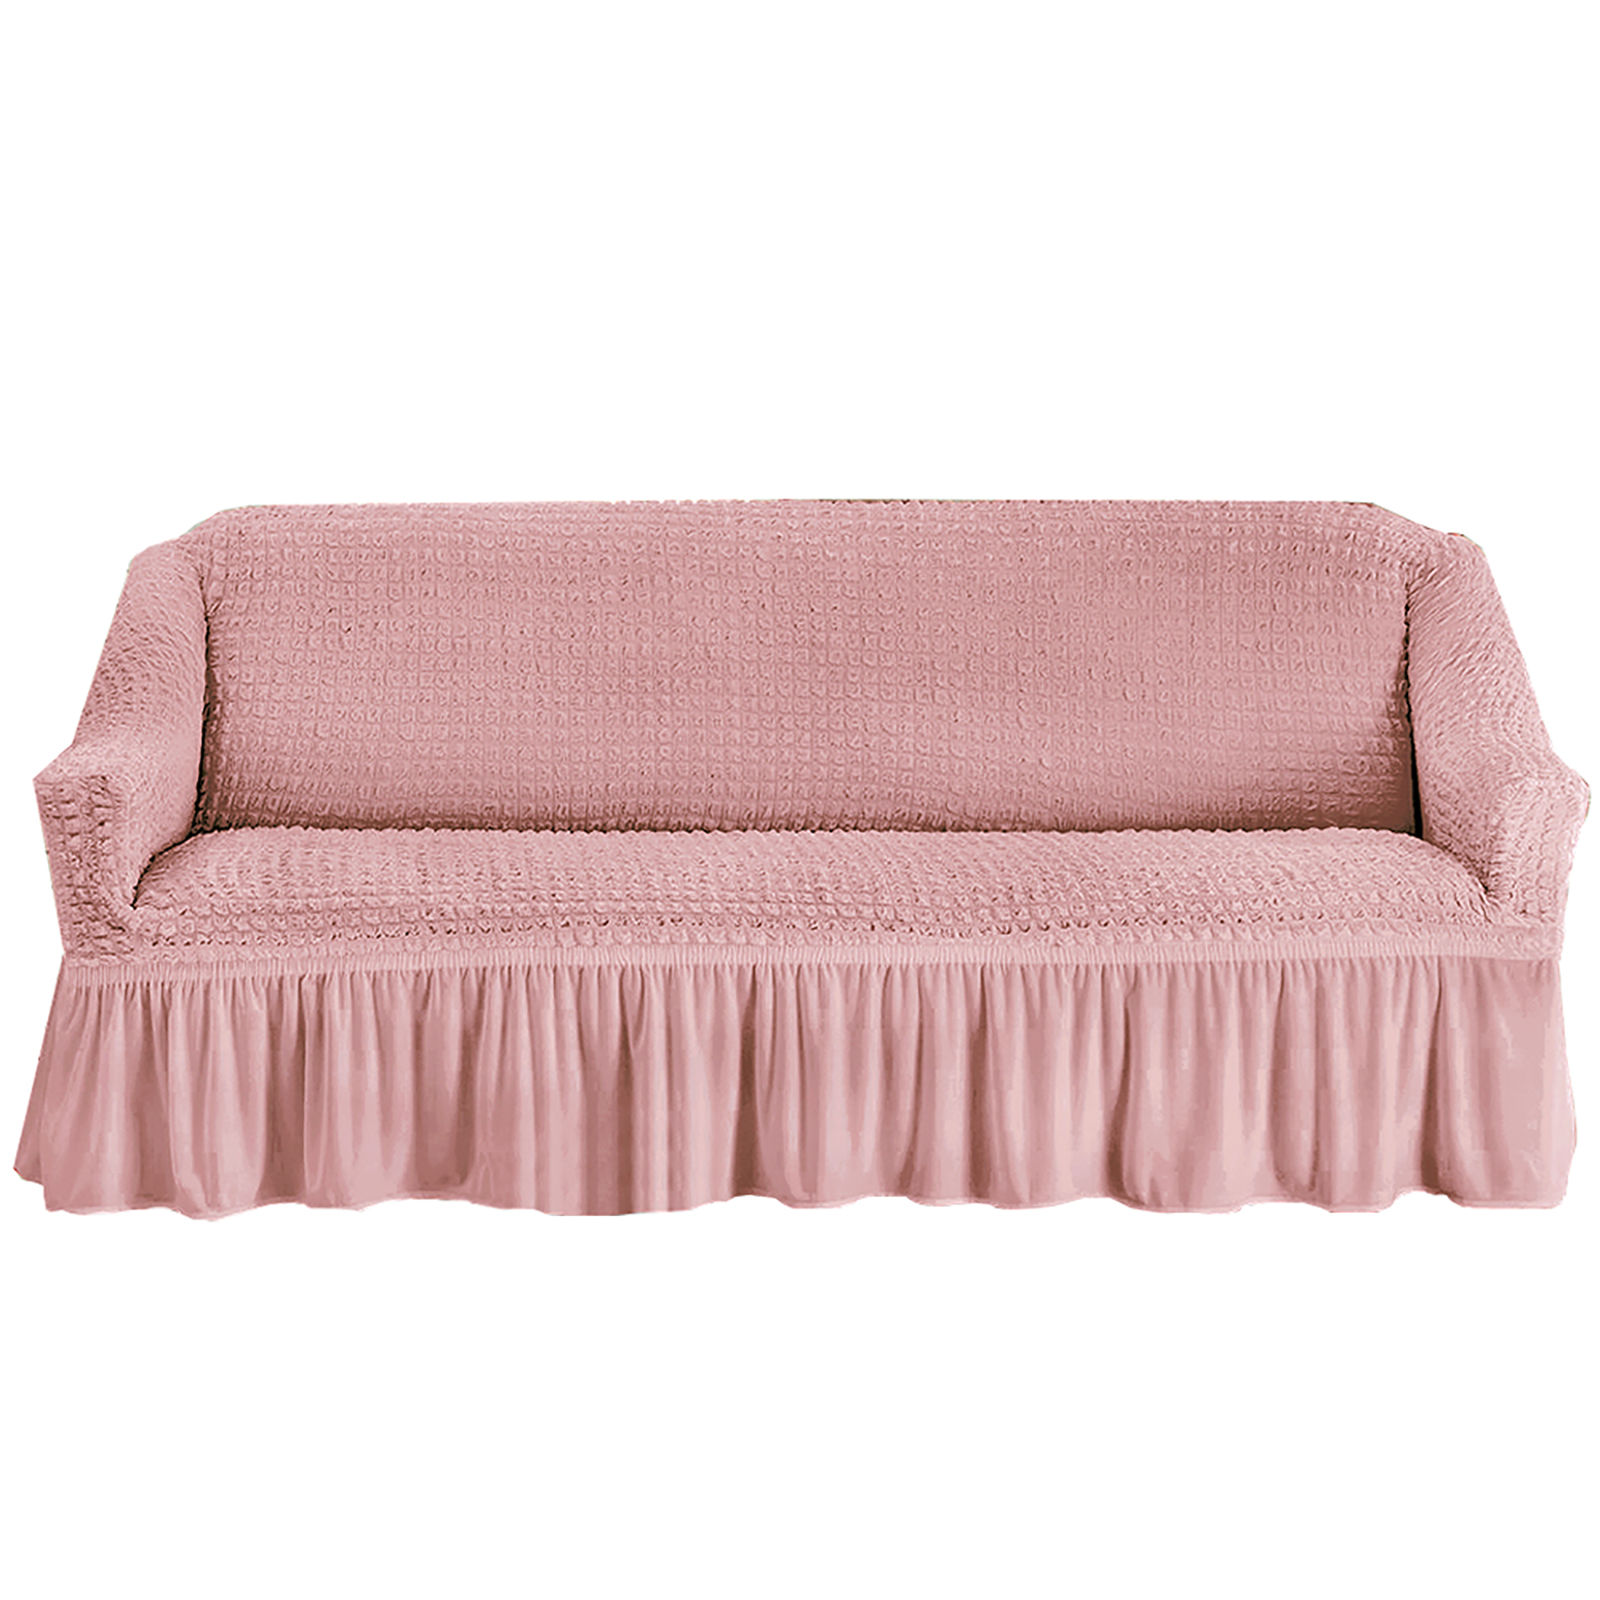 Stretch Sofa Slipcover, 3 Seater Sofa Slipcovers With Skirt With Armless Soft Sofa Cover Elastic Straps Sofa Slipcover For Living Room Kids Pets-Pink-Small